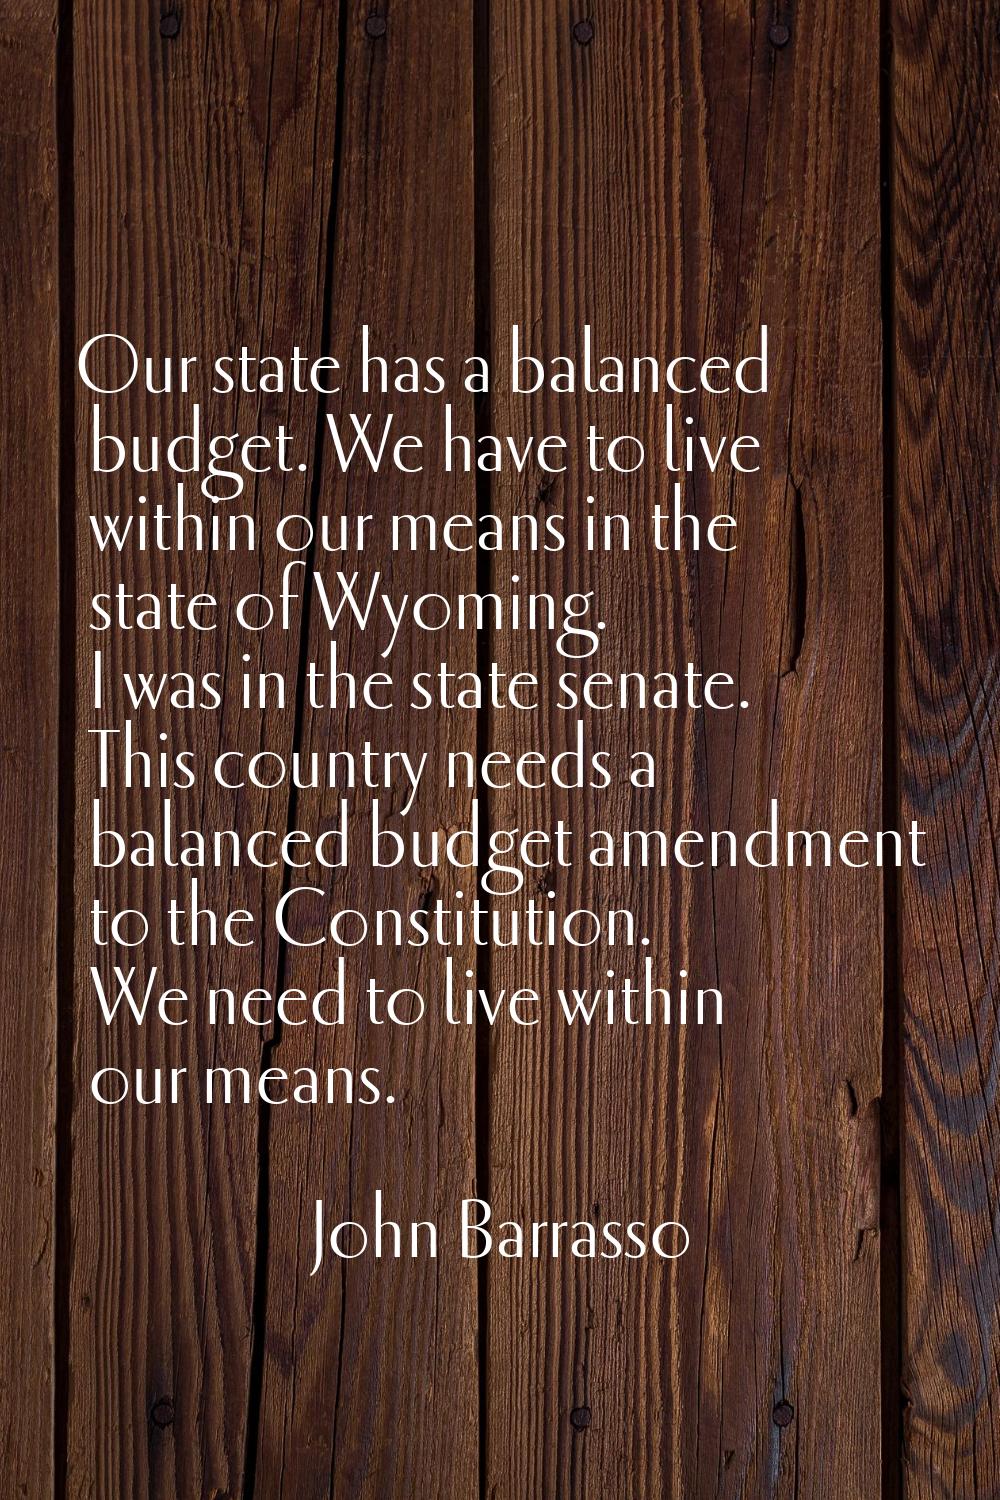 Our state has a balanced budget. We have to live within our means in the state of Wyoming. I was in